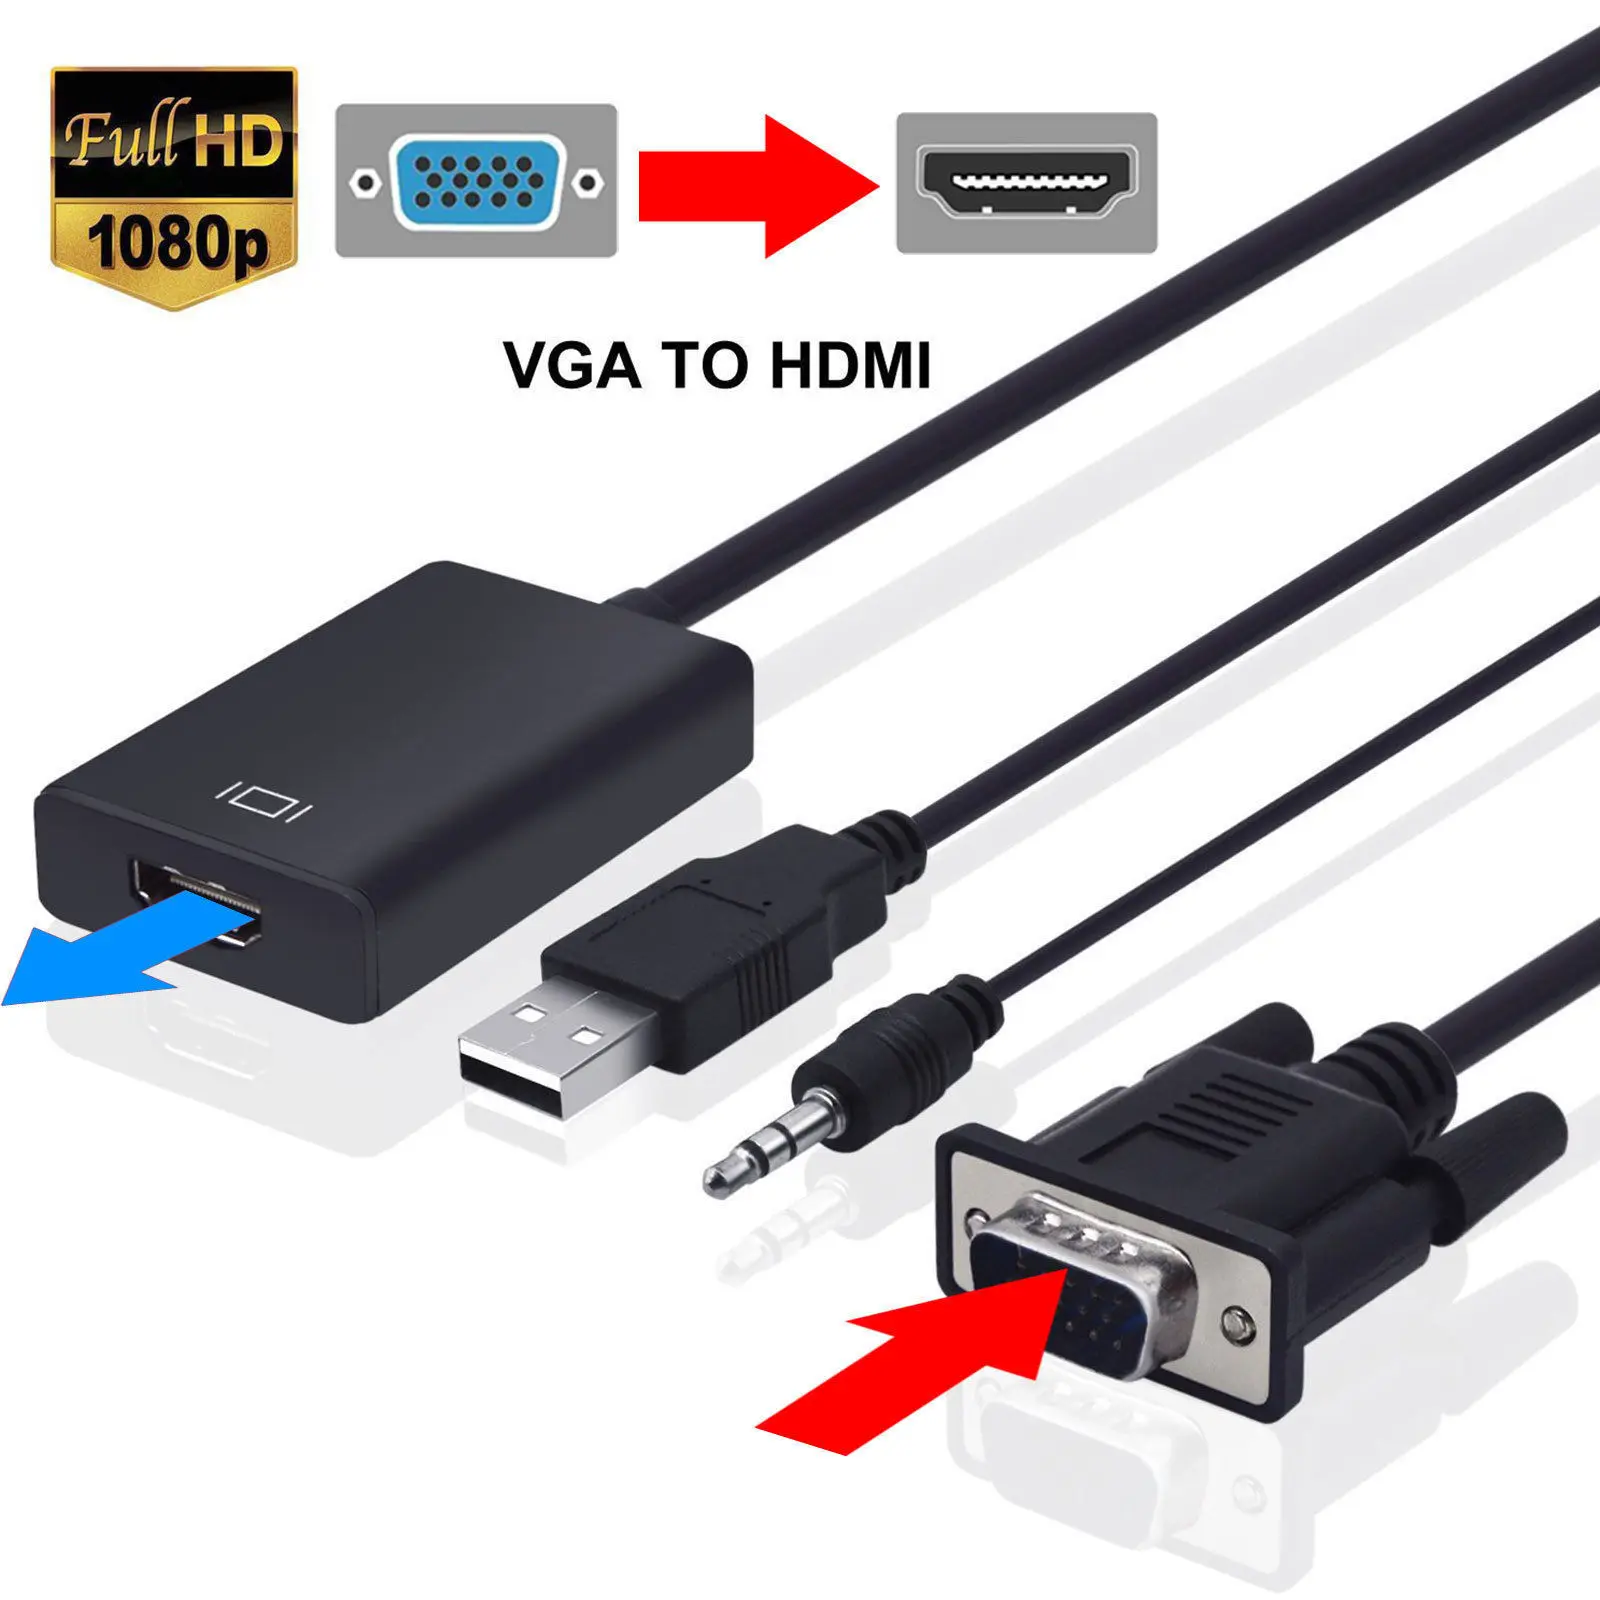 

BESIUNI VGA 3.5mm Audio to HDMI Converter HDMI Adapter with USB Power Supply for laptop PC to TV Projector Display Monitor